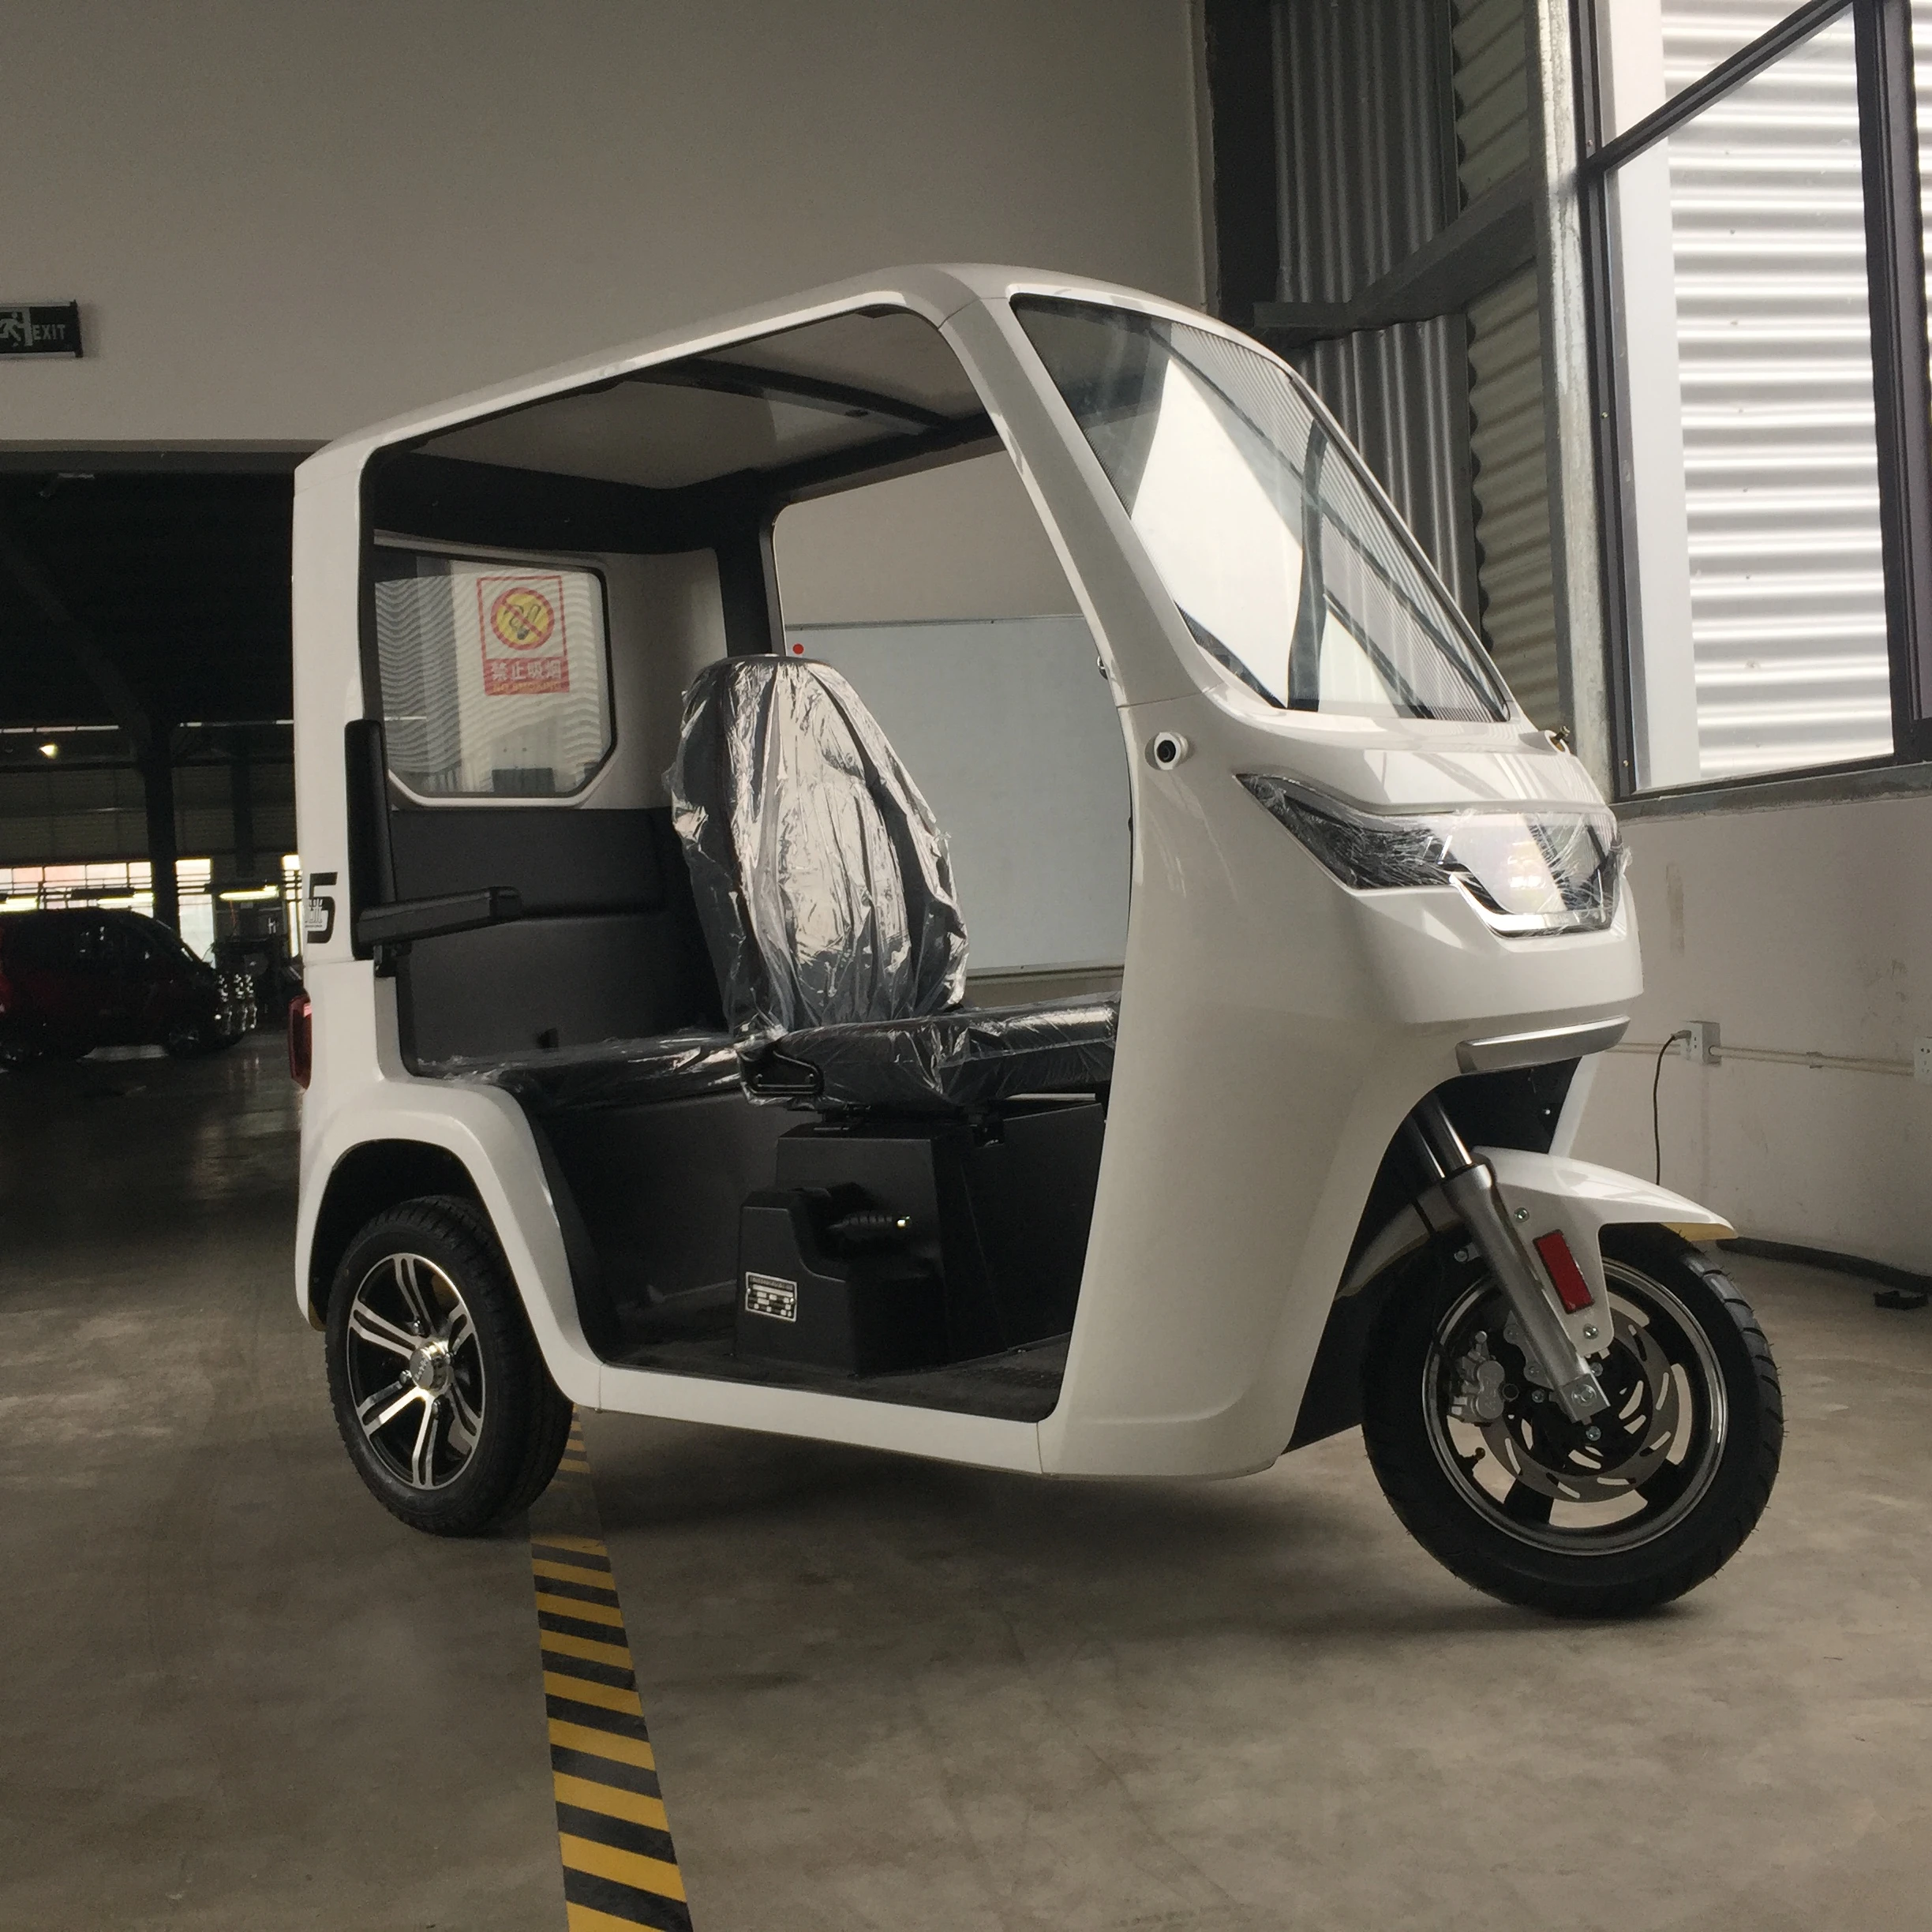 alibaba electric tricycle